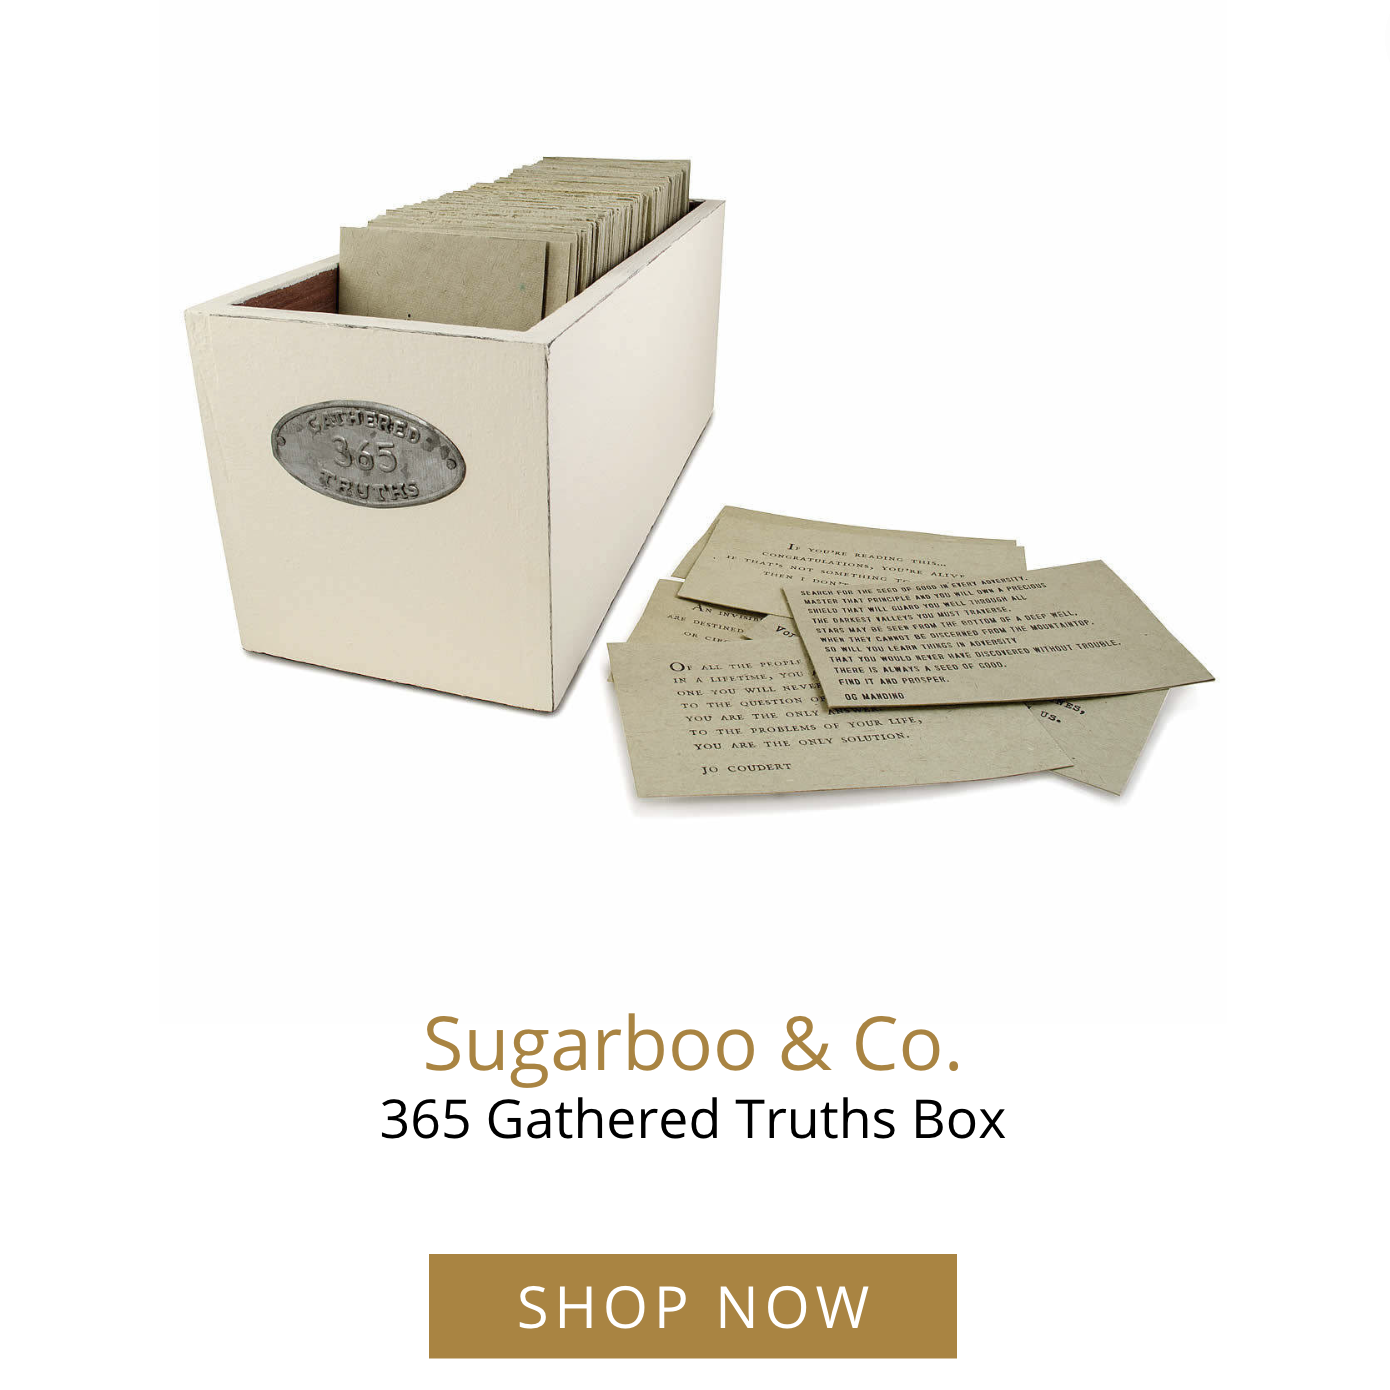 Sugarboo & Co. 365 Gathered Truths Box